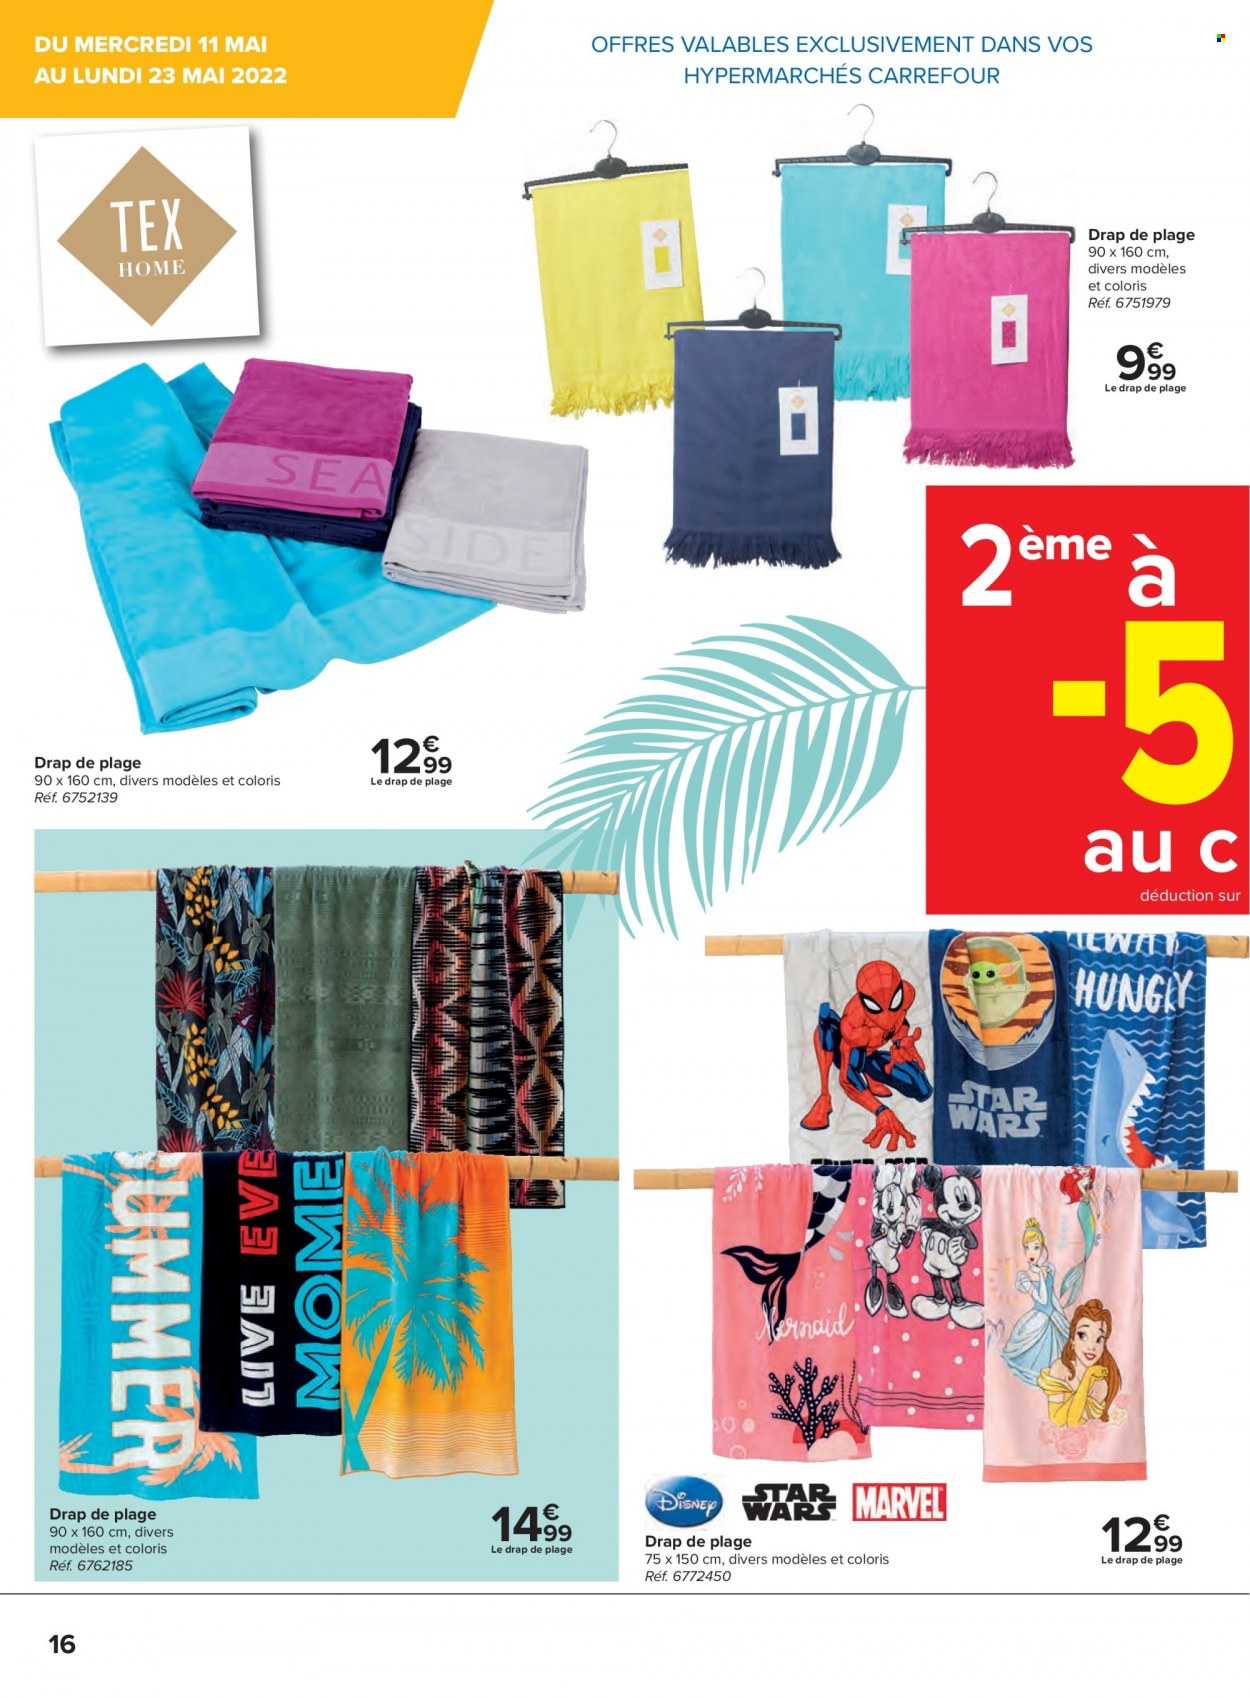 Catalogue Carrefour hypermarkt - 11.5.2022 - 23.5.2022. Page 16.